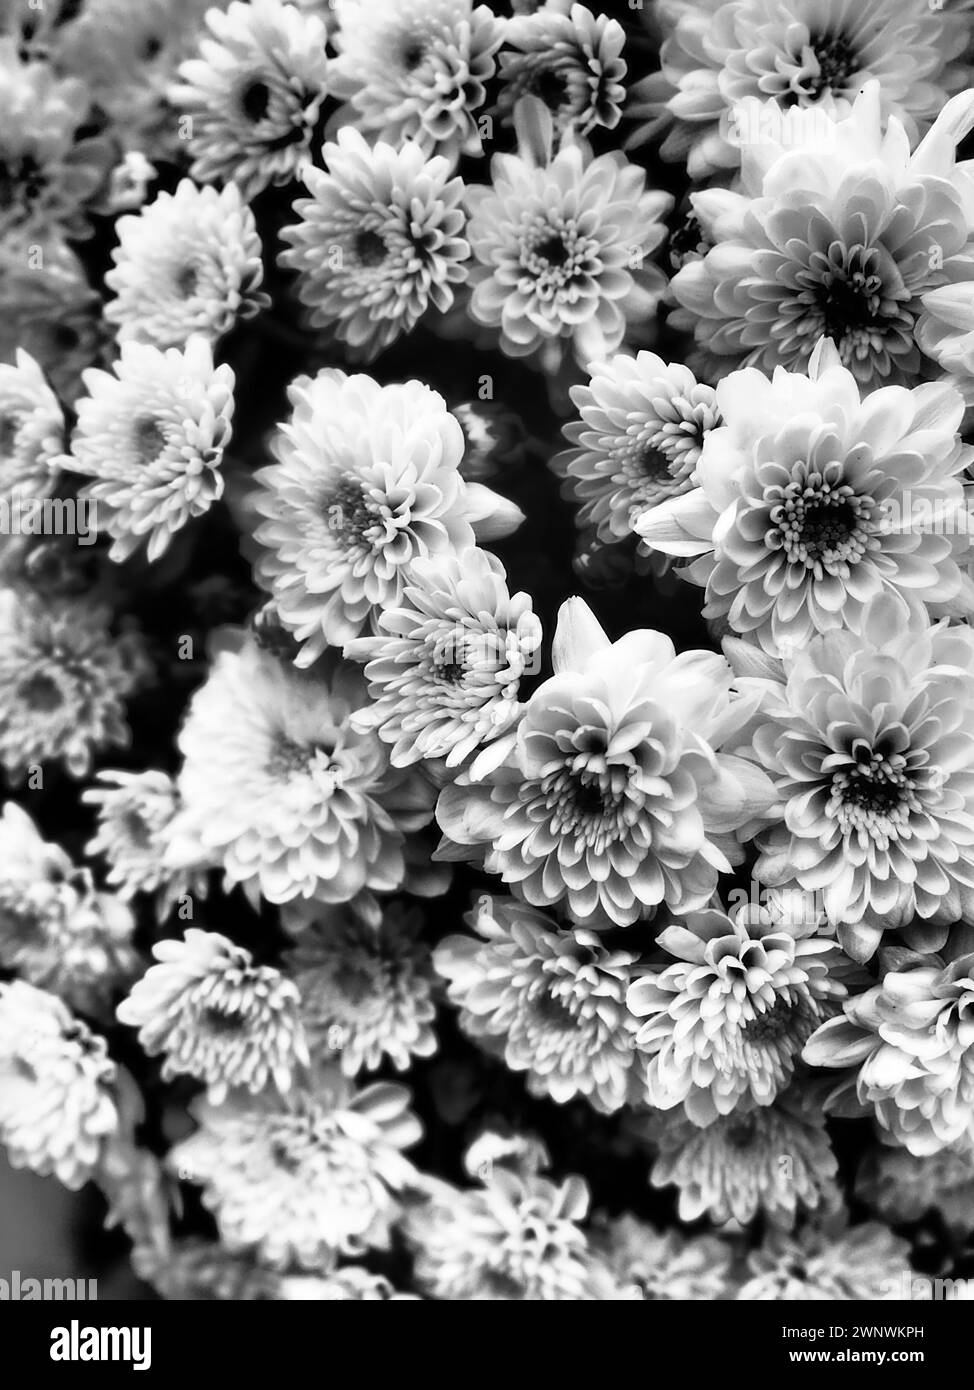 Chrysanthemums in a bouquet. Black and white monochrome photography. Dark vignetting. Postcard or card. Congratulations or expressions of regret Stock Photo